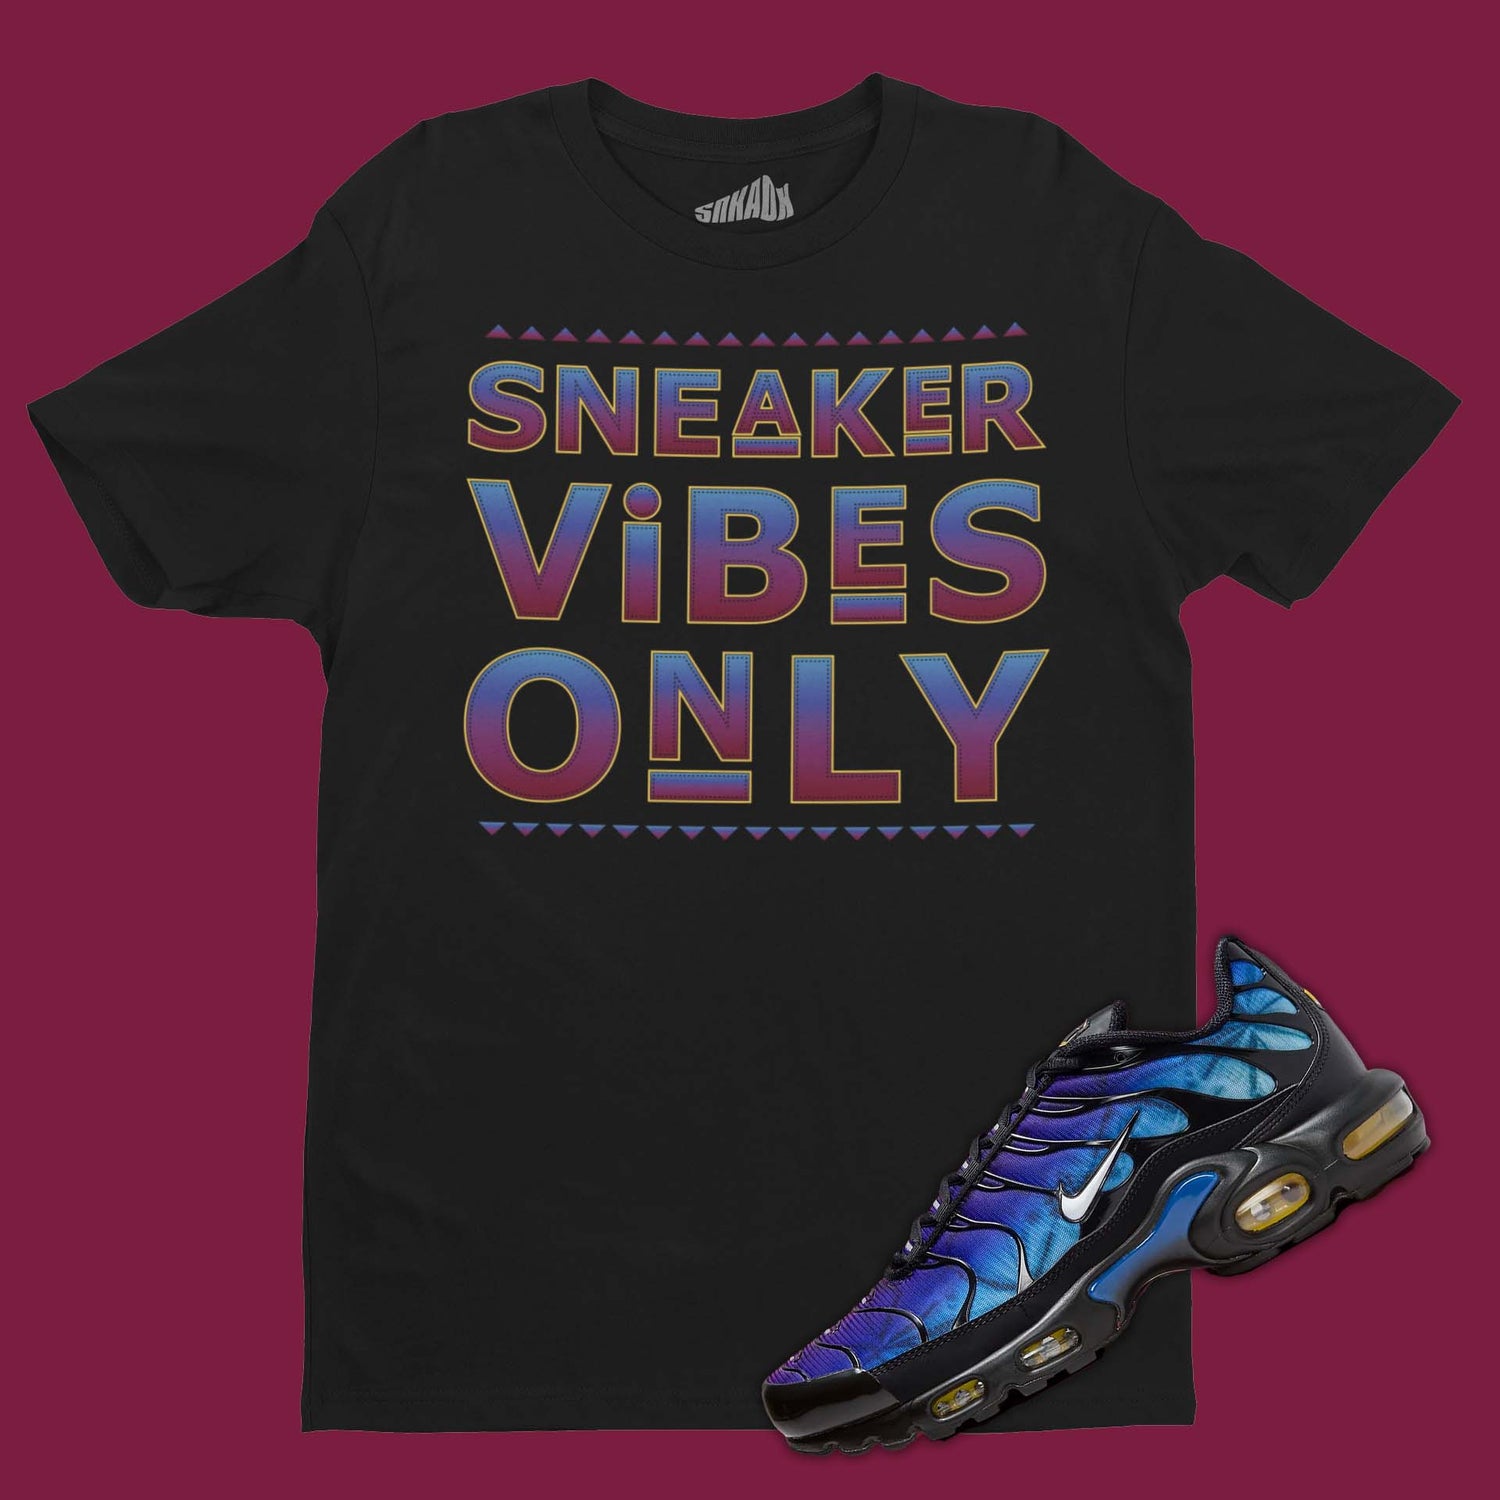 Air Max Plus 25th Anniversary Matching T-Shirt from SNKADX